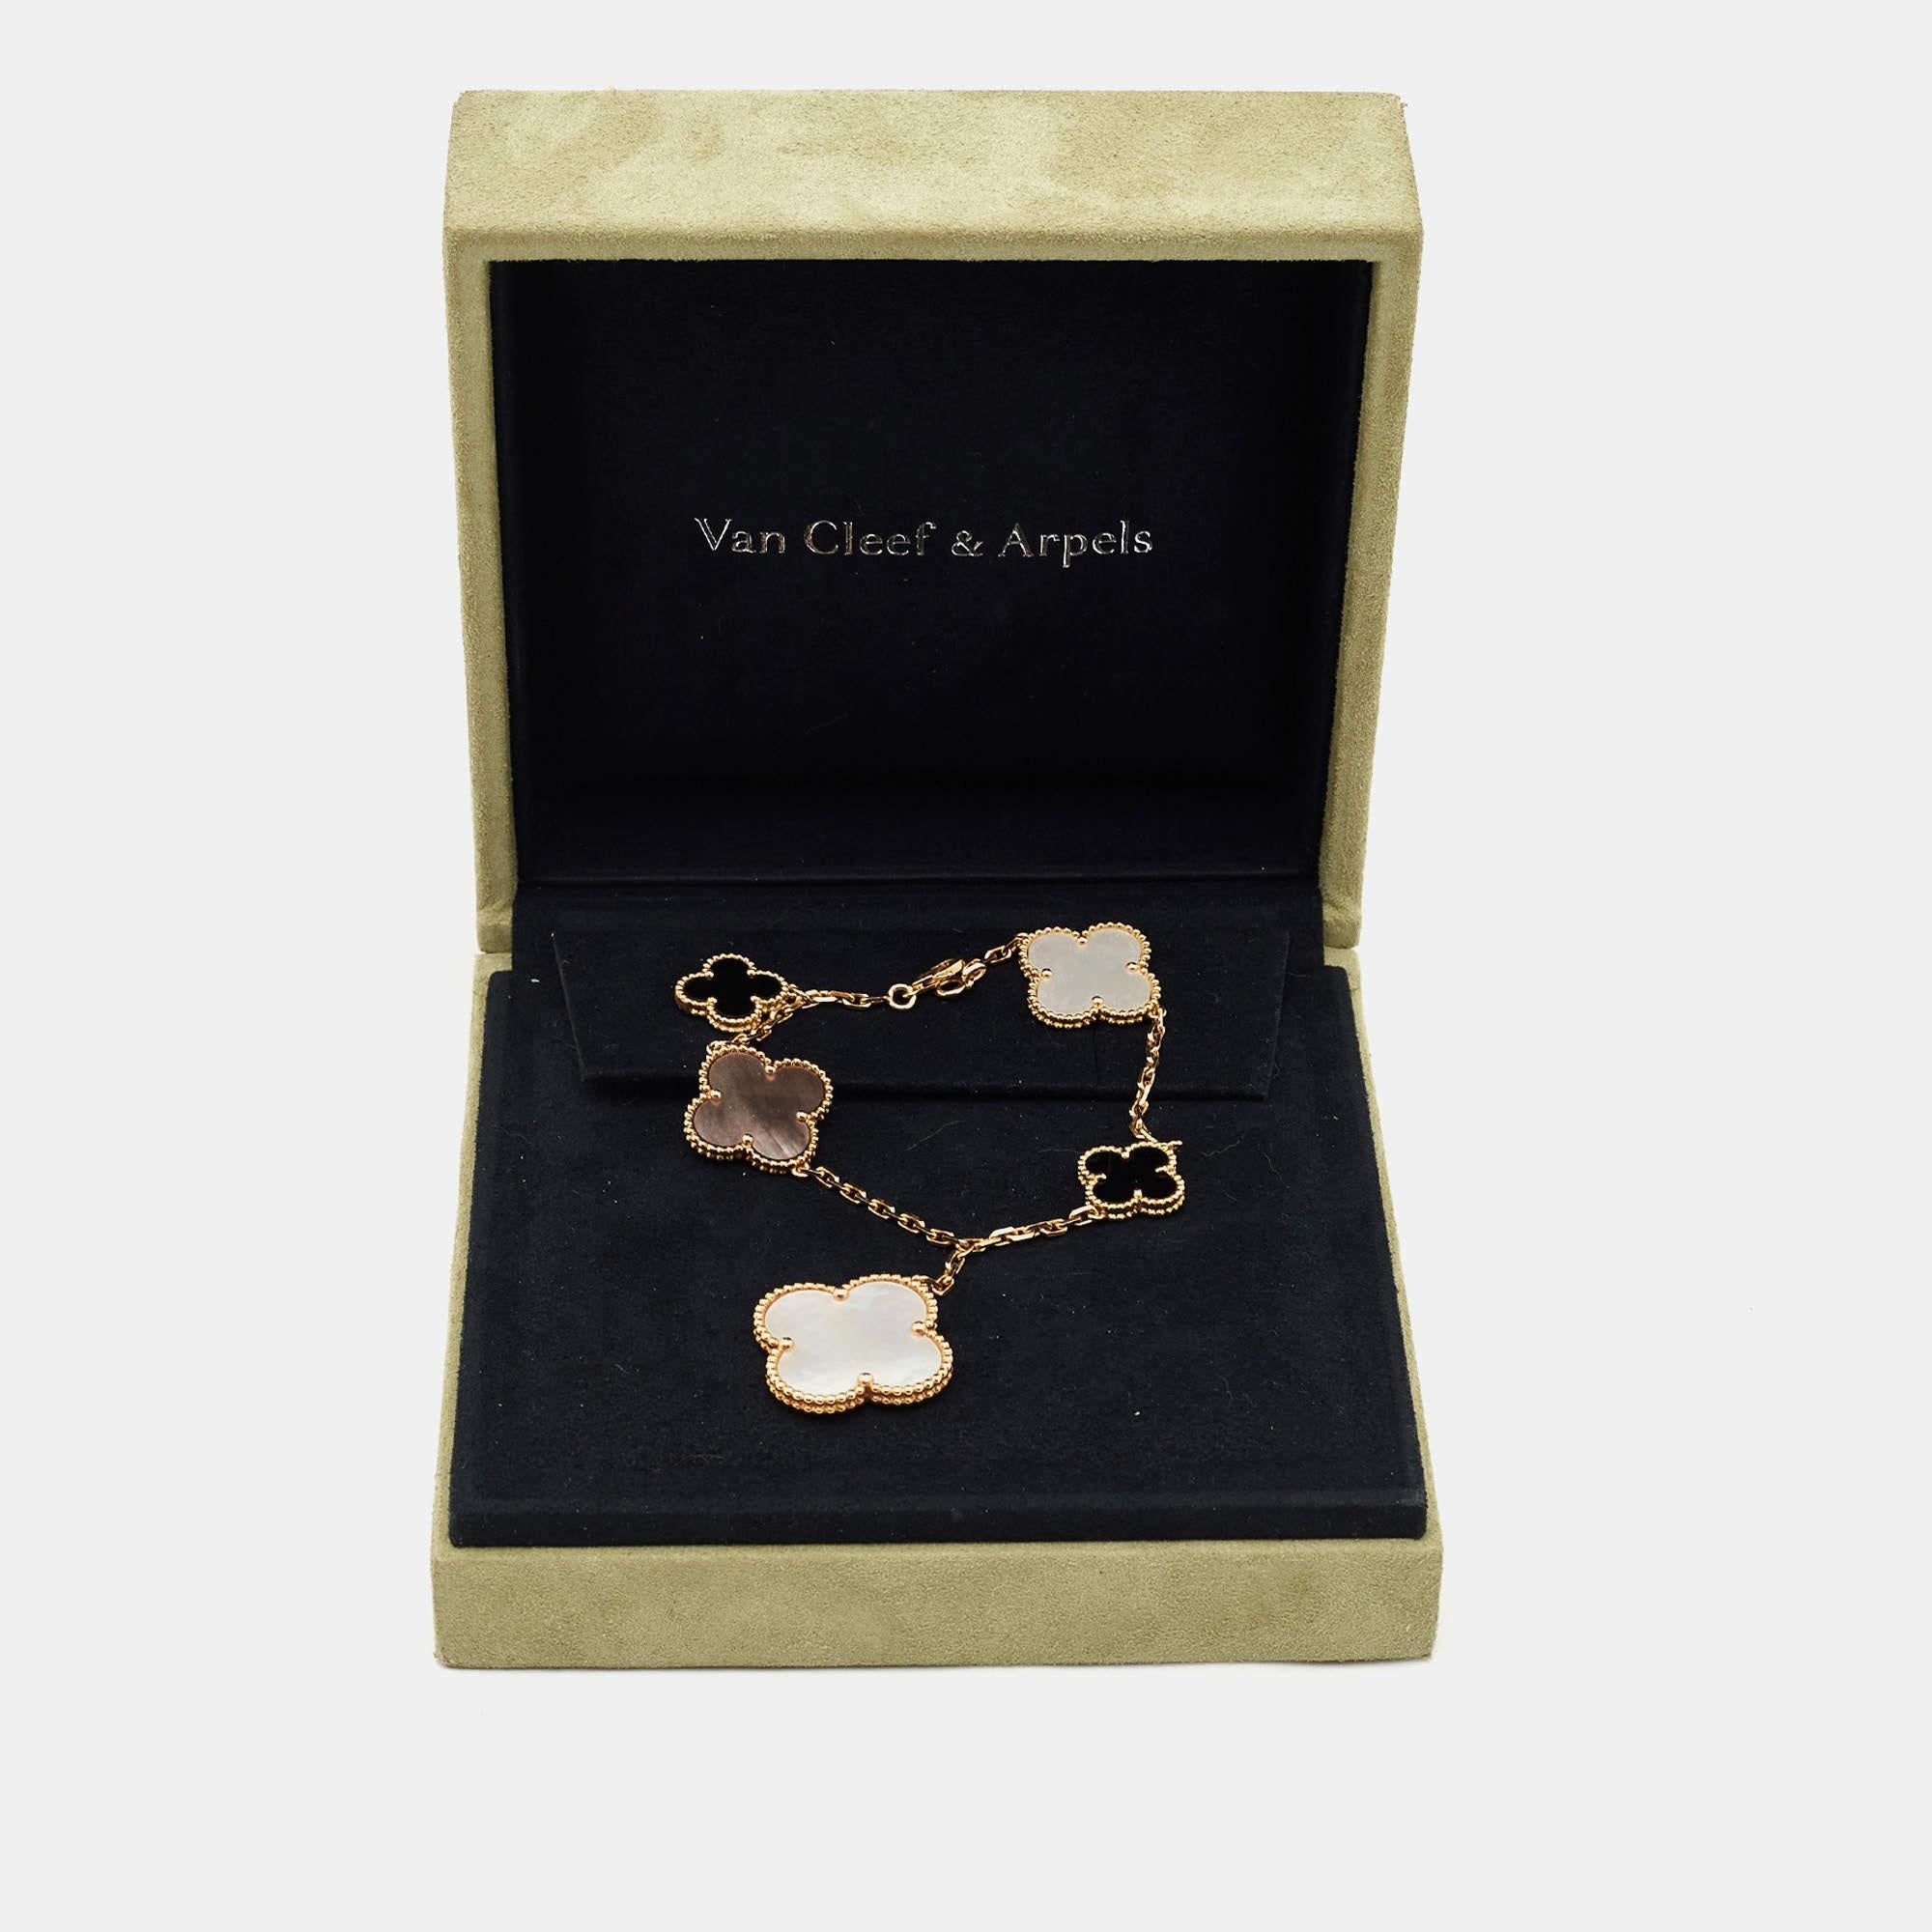 The Van Cleef & Arpels Magic Alhambra bracelet is an exquisite piece of jewelry crafted with meticulous attention to detail. Made from 18k yellow gold, this bracelet features the iconic Alhambra motif adorned with shimmering mother of pearl and